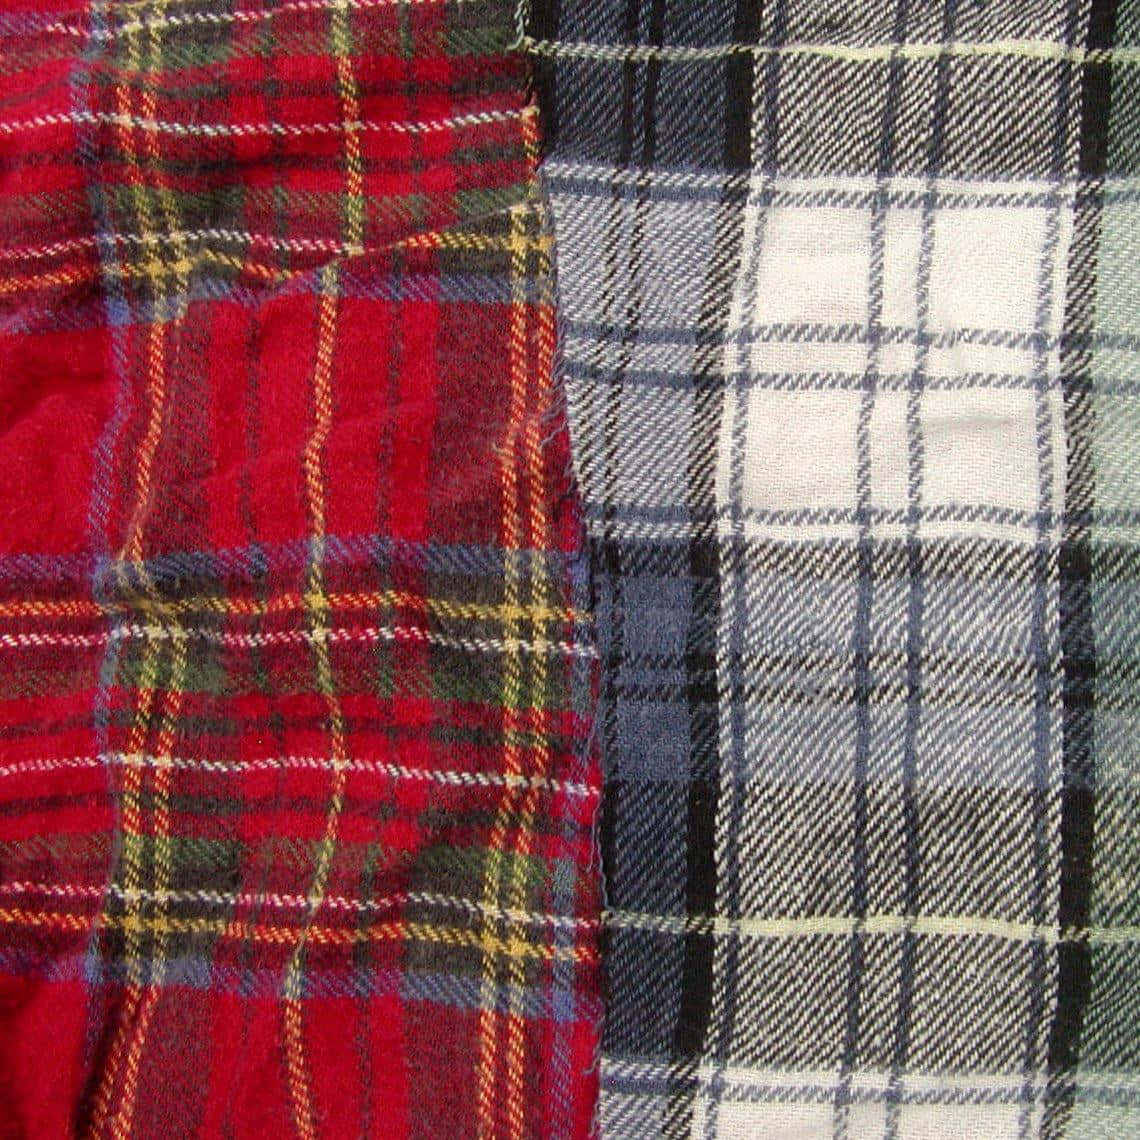 Download a plaid fabric with red, blue, and green | Wallpapers.com